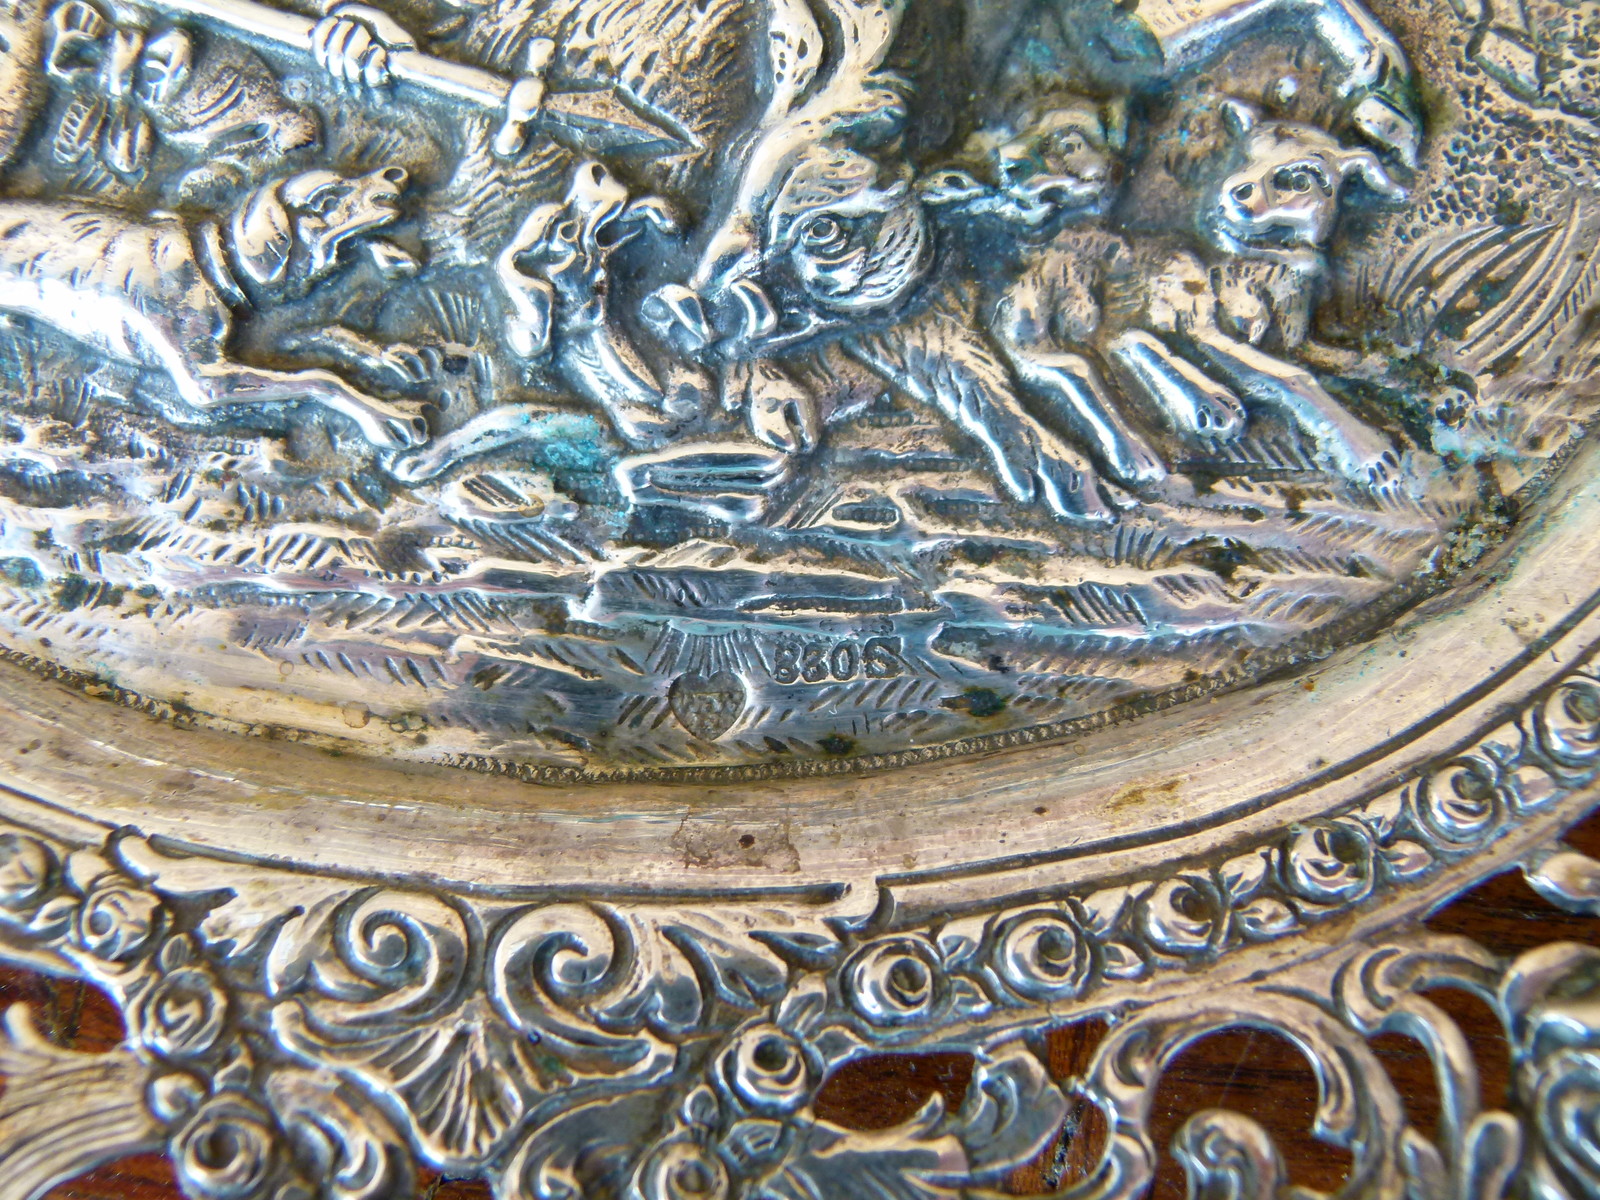 Silver plate with a hunting scene 275gram